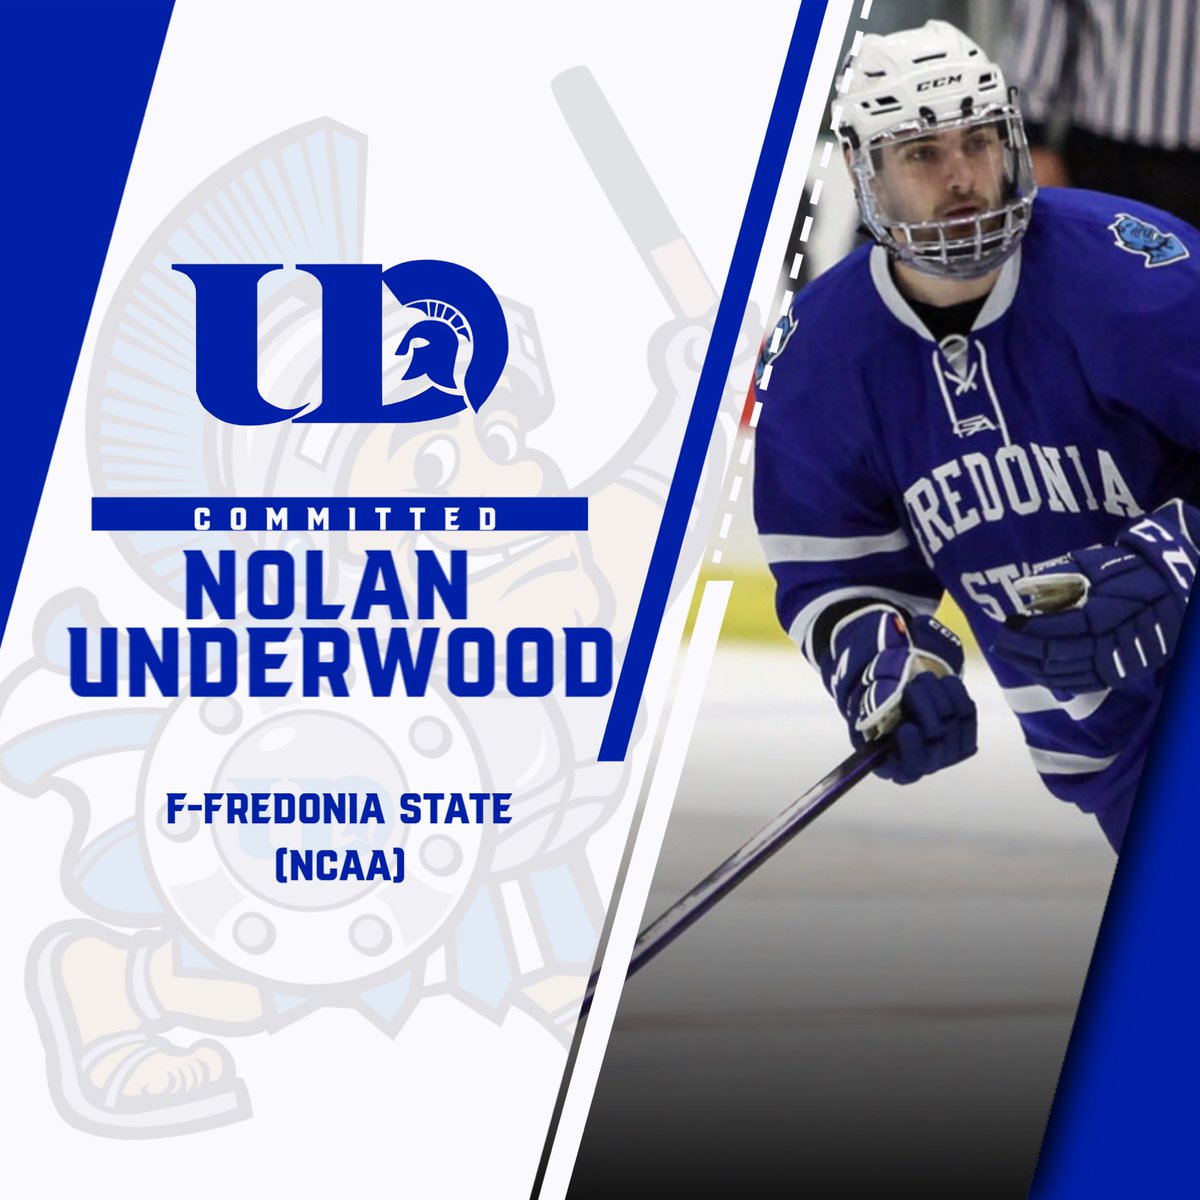 Welcome to the University of Dubuque, Nolan! #UDHockey